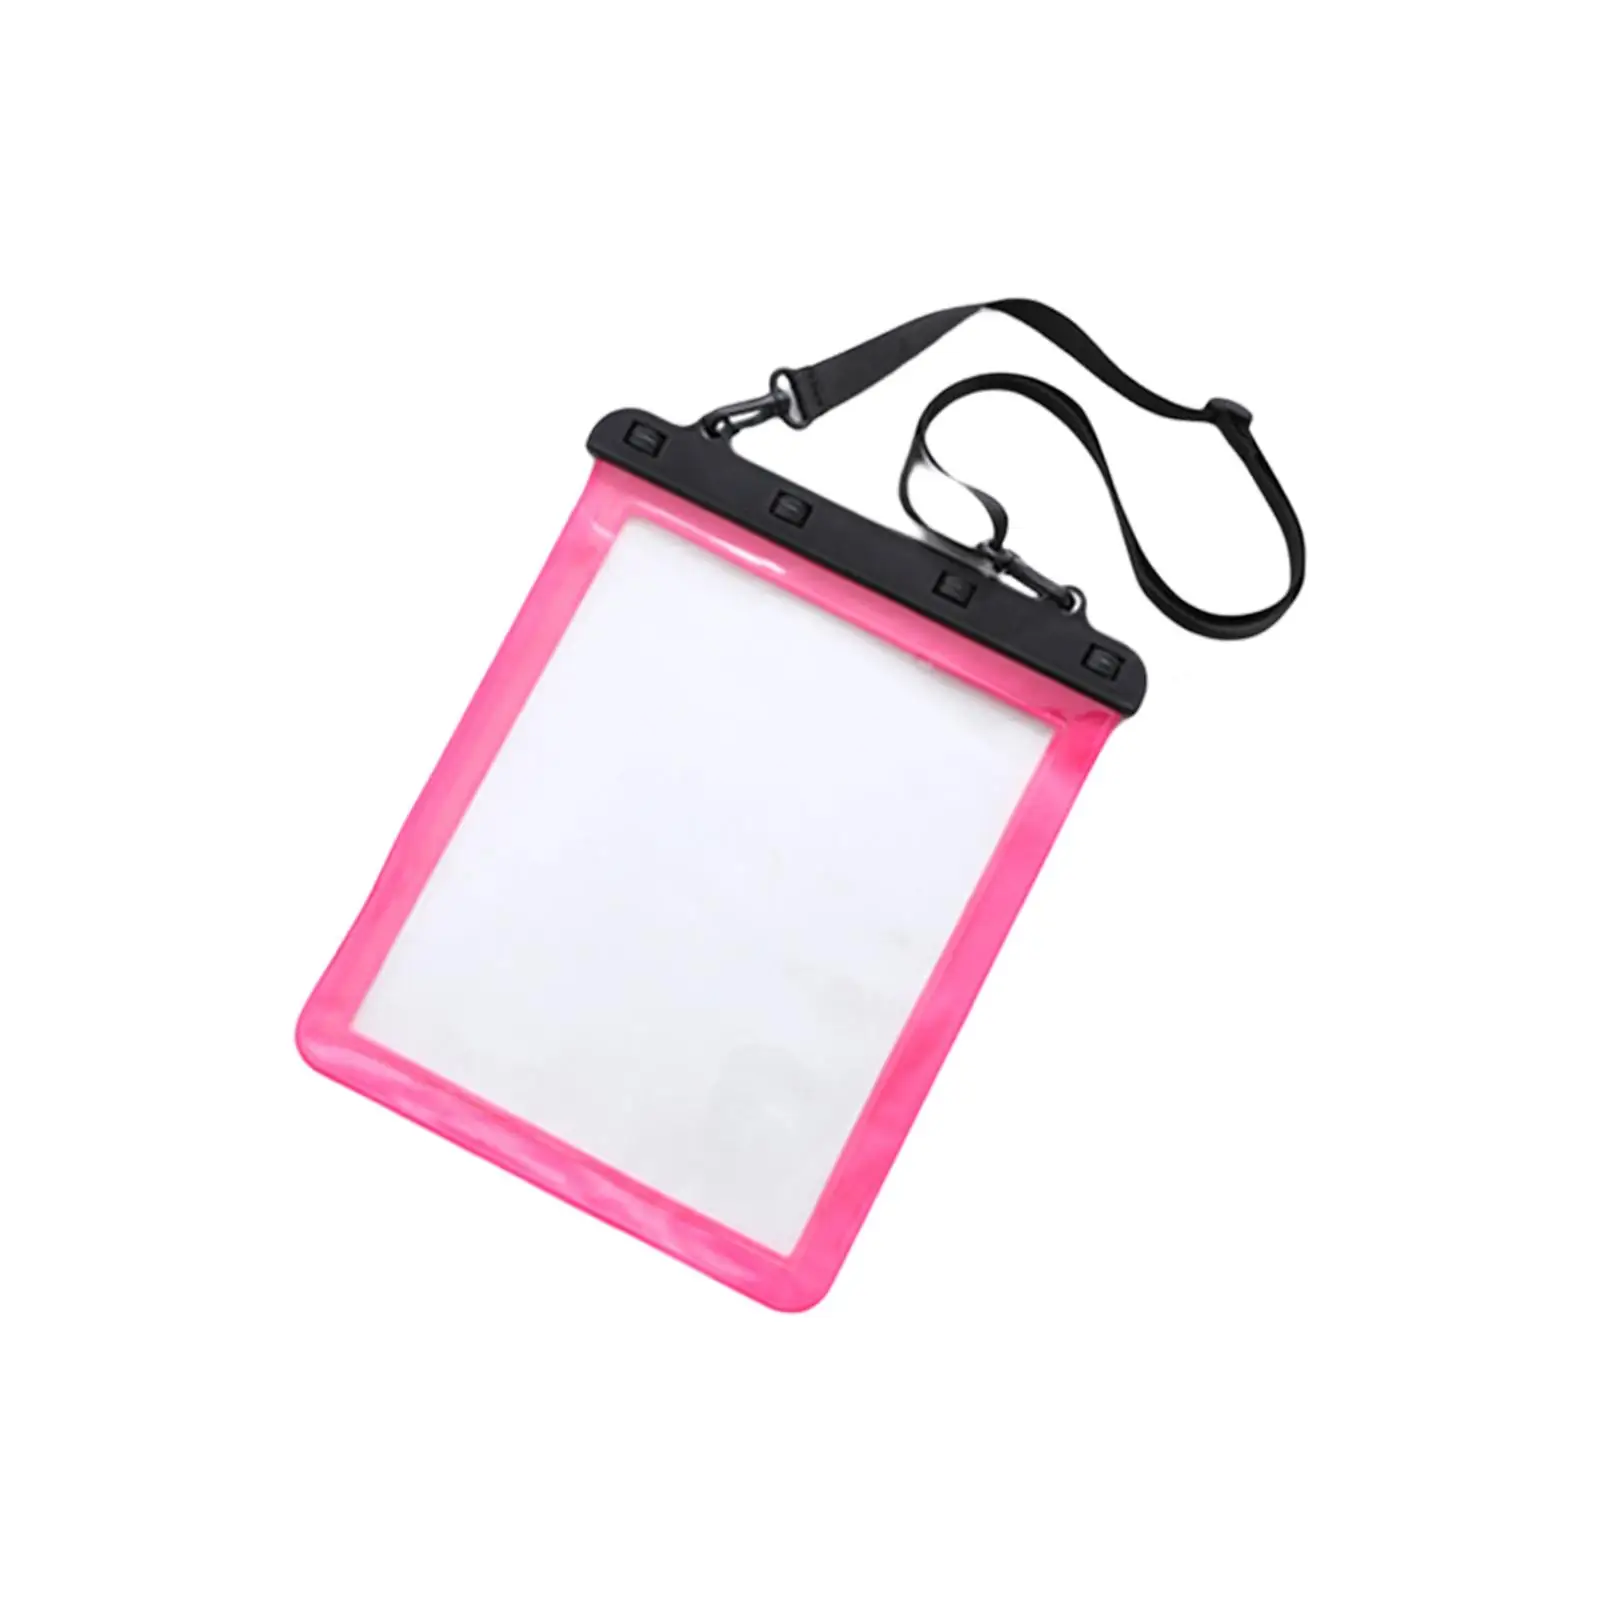 Clear Waterproof Bag Novelty with Detachable Shoulder Strap Sunglasses Storage Pouch for Snorkeling Water Sports Boating